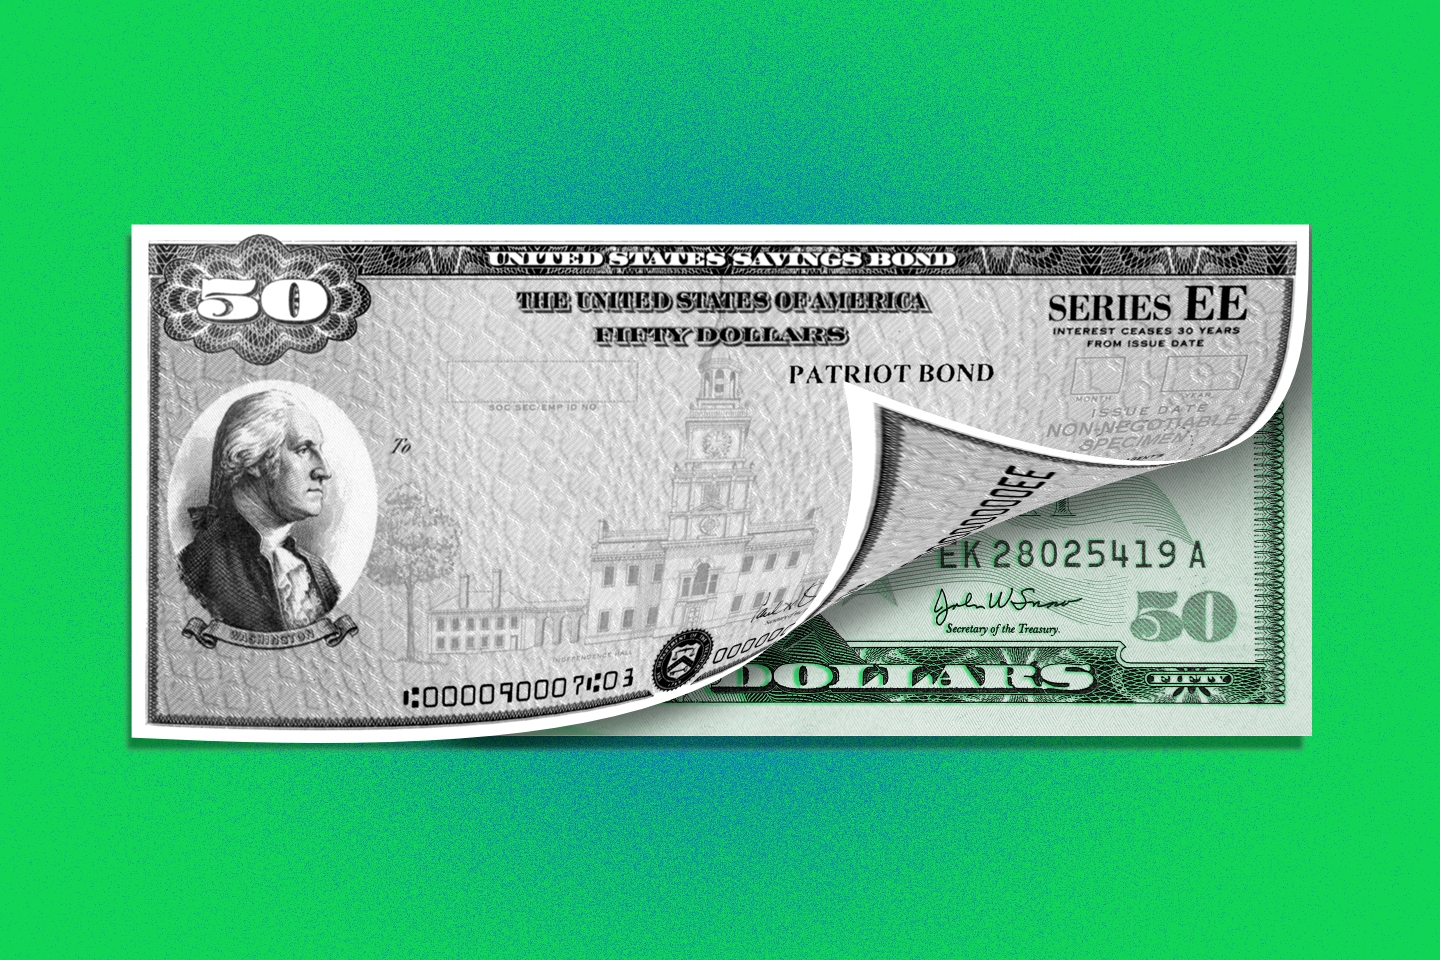 Photo illustration of a United States savings bond certificate curling up at the bottom right corner to reveal a $50 bill underneath.